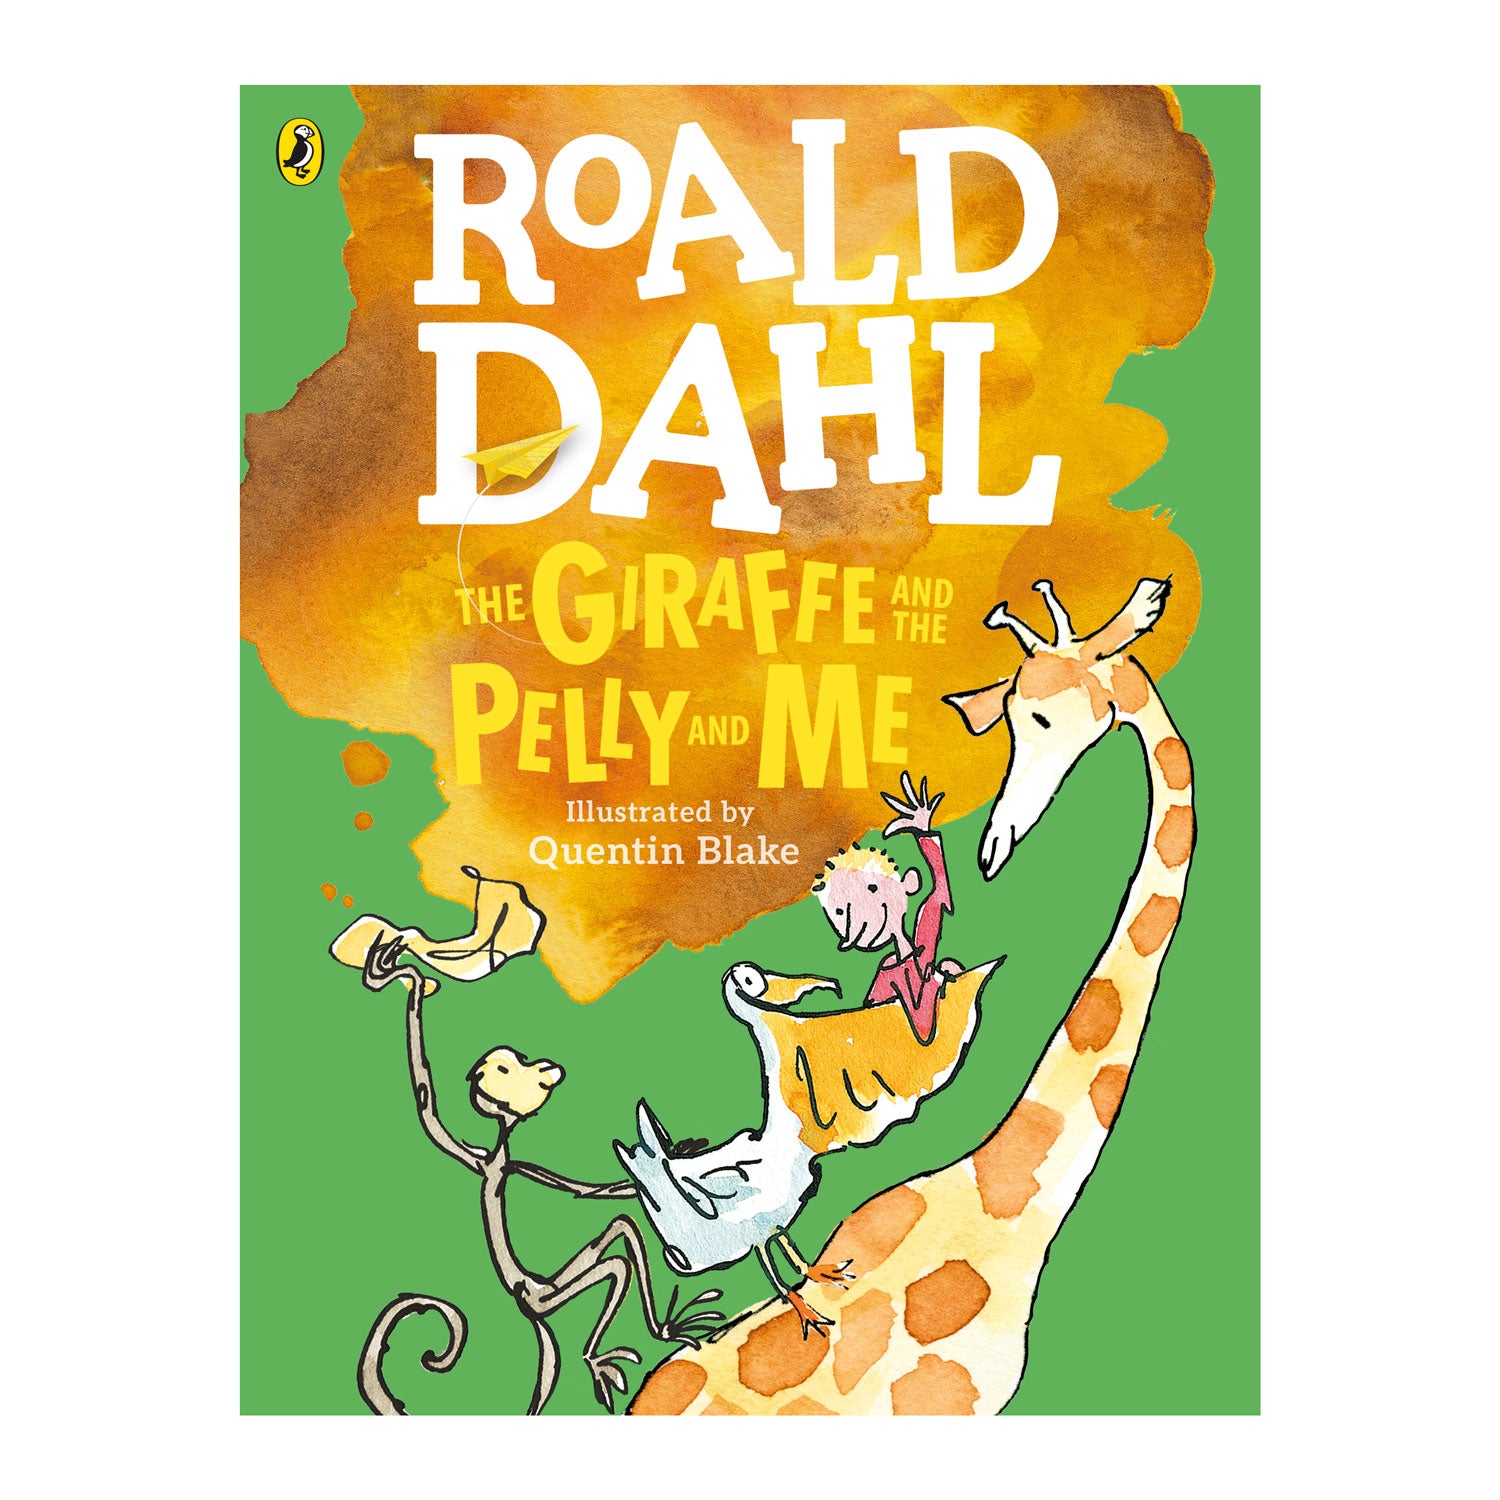 The Giraffe and the Pelly and Me by Roald Dahl with illustrations by Quentin Blake